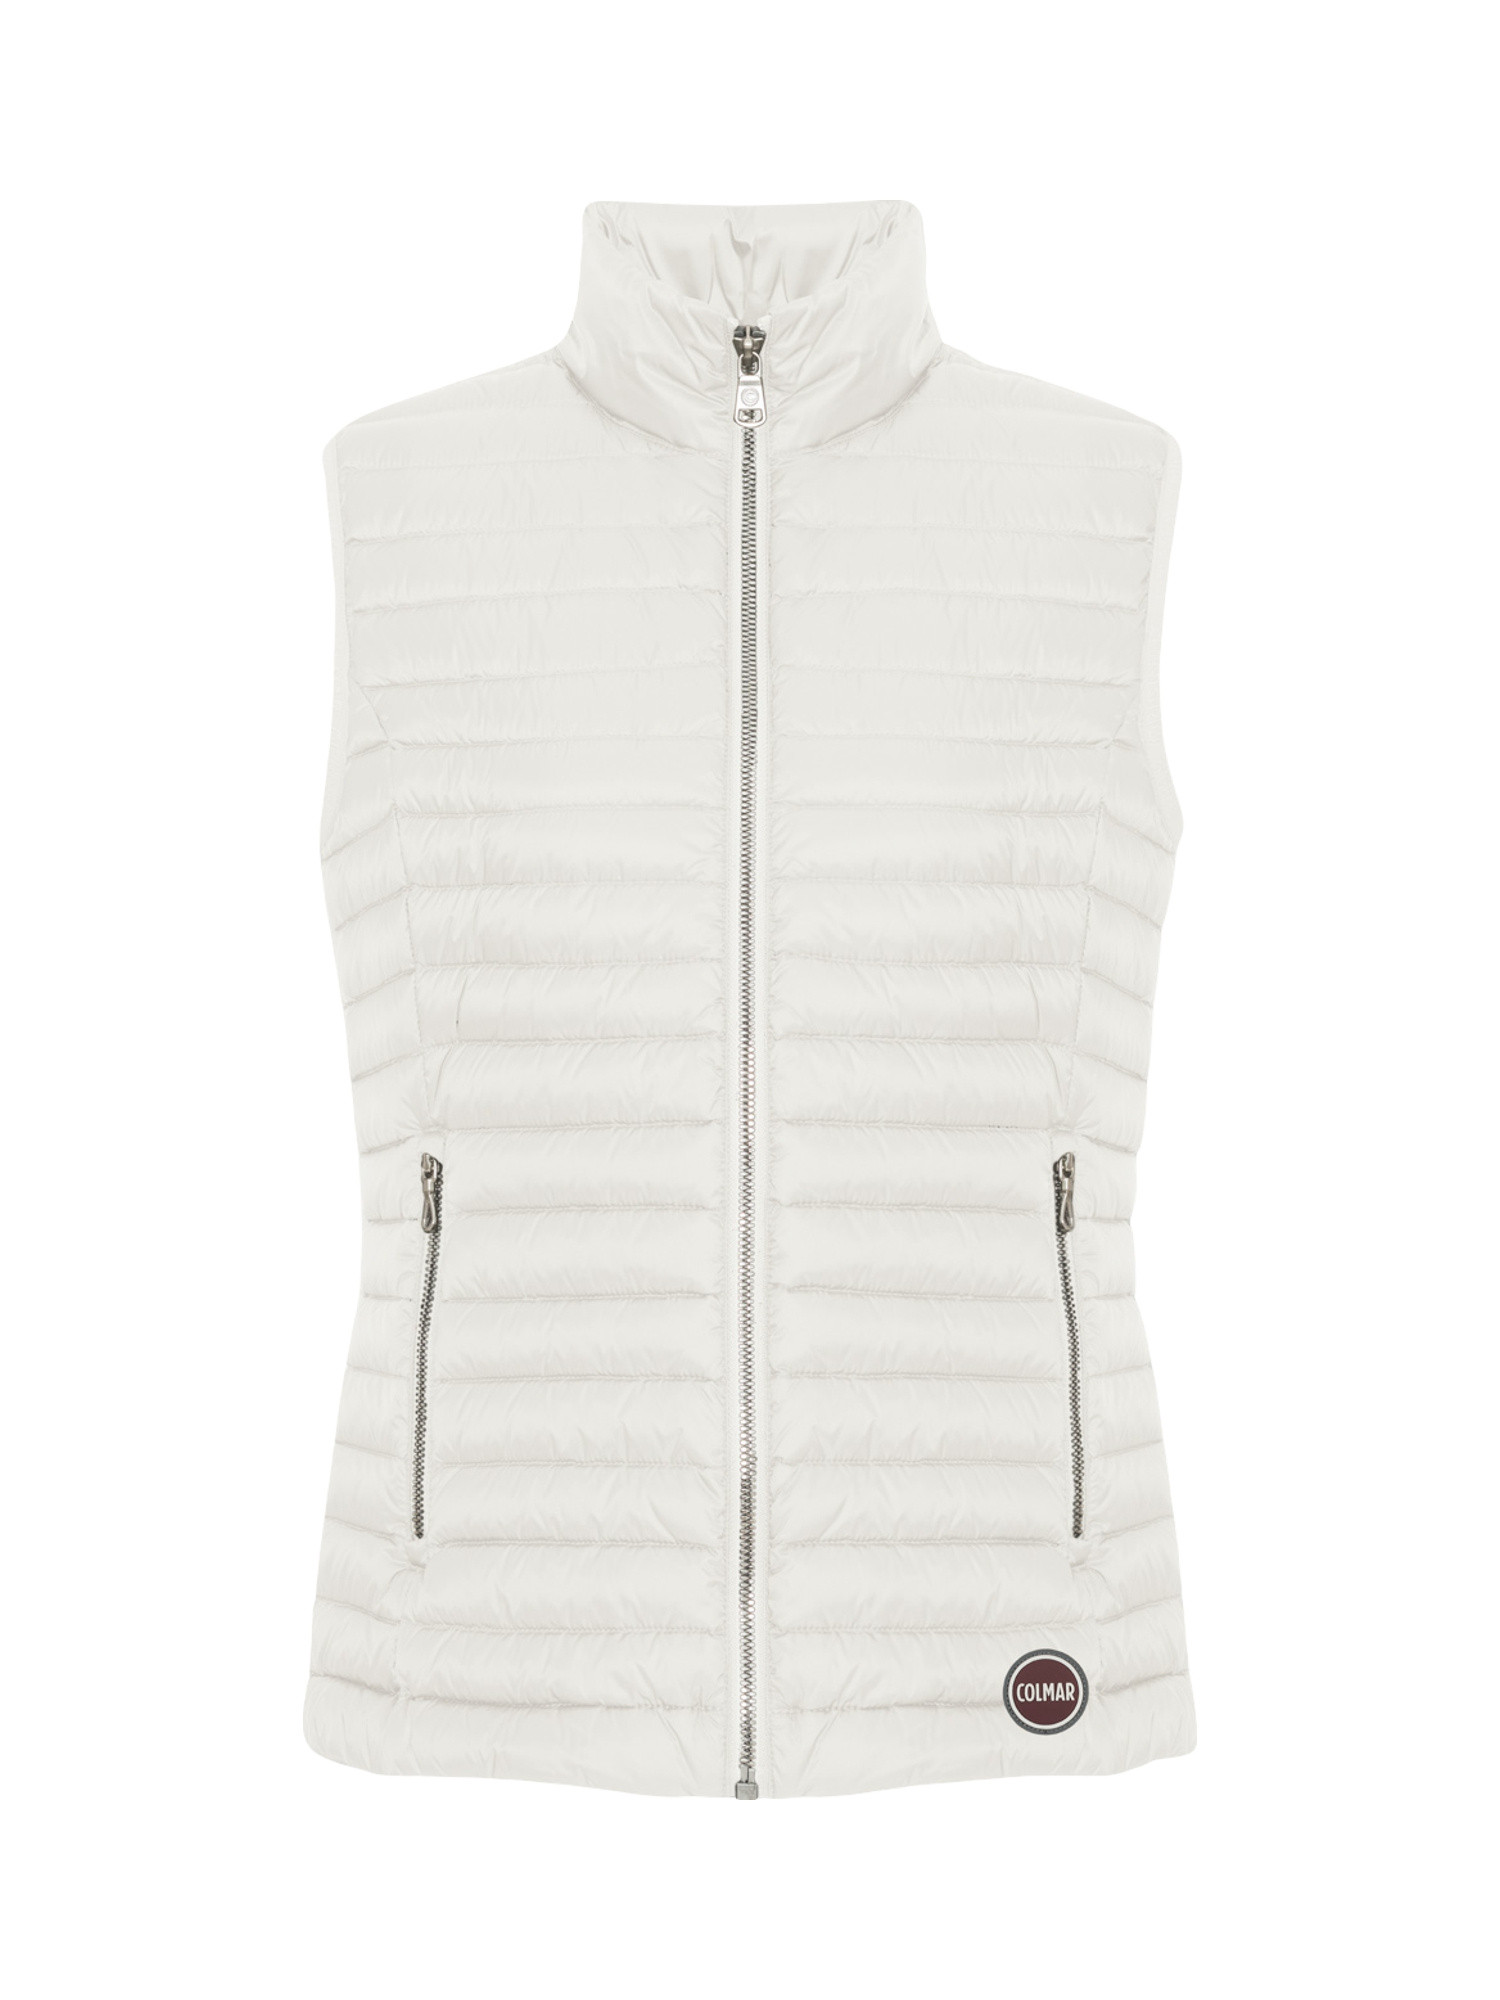 Colmar - Quilted gilet, White, large image number 0